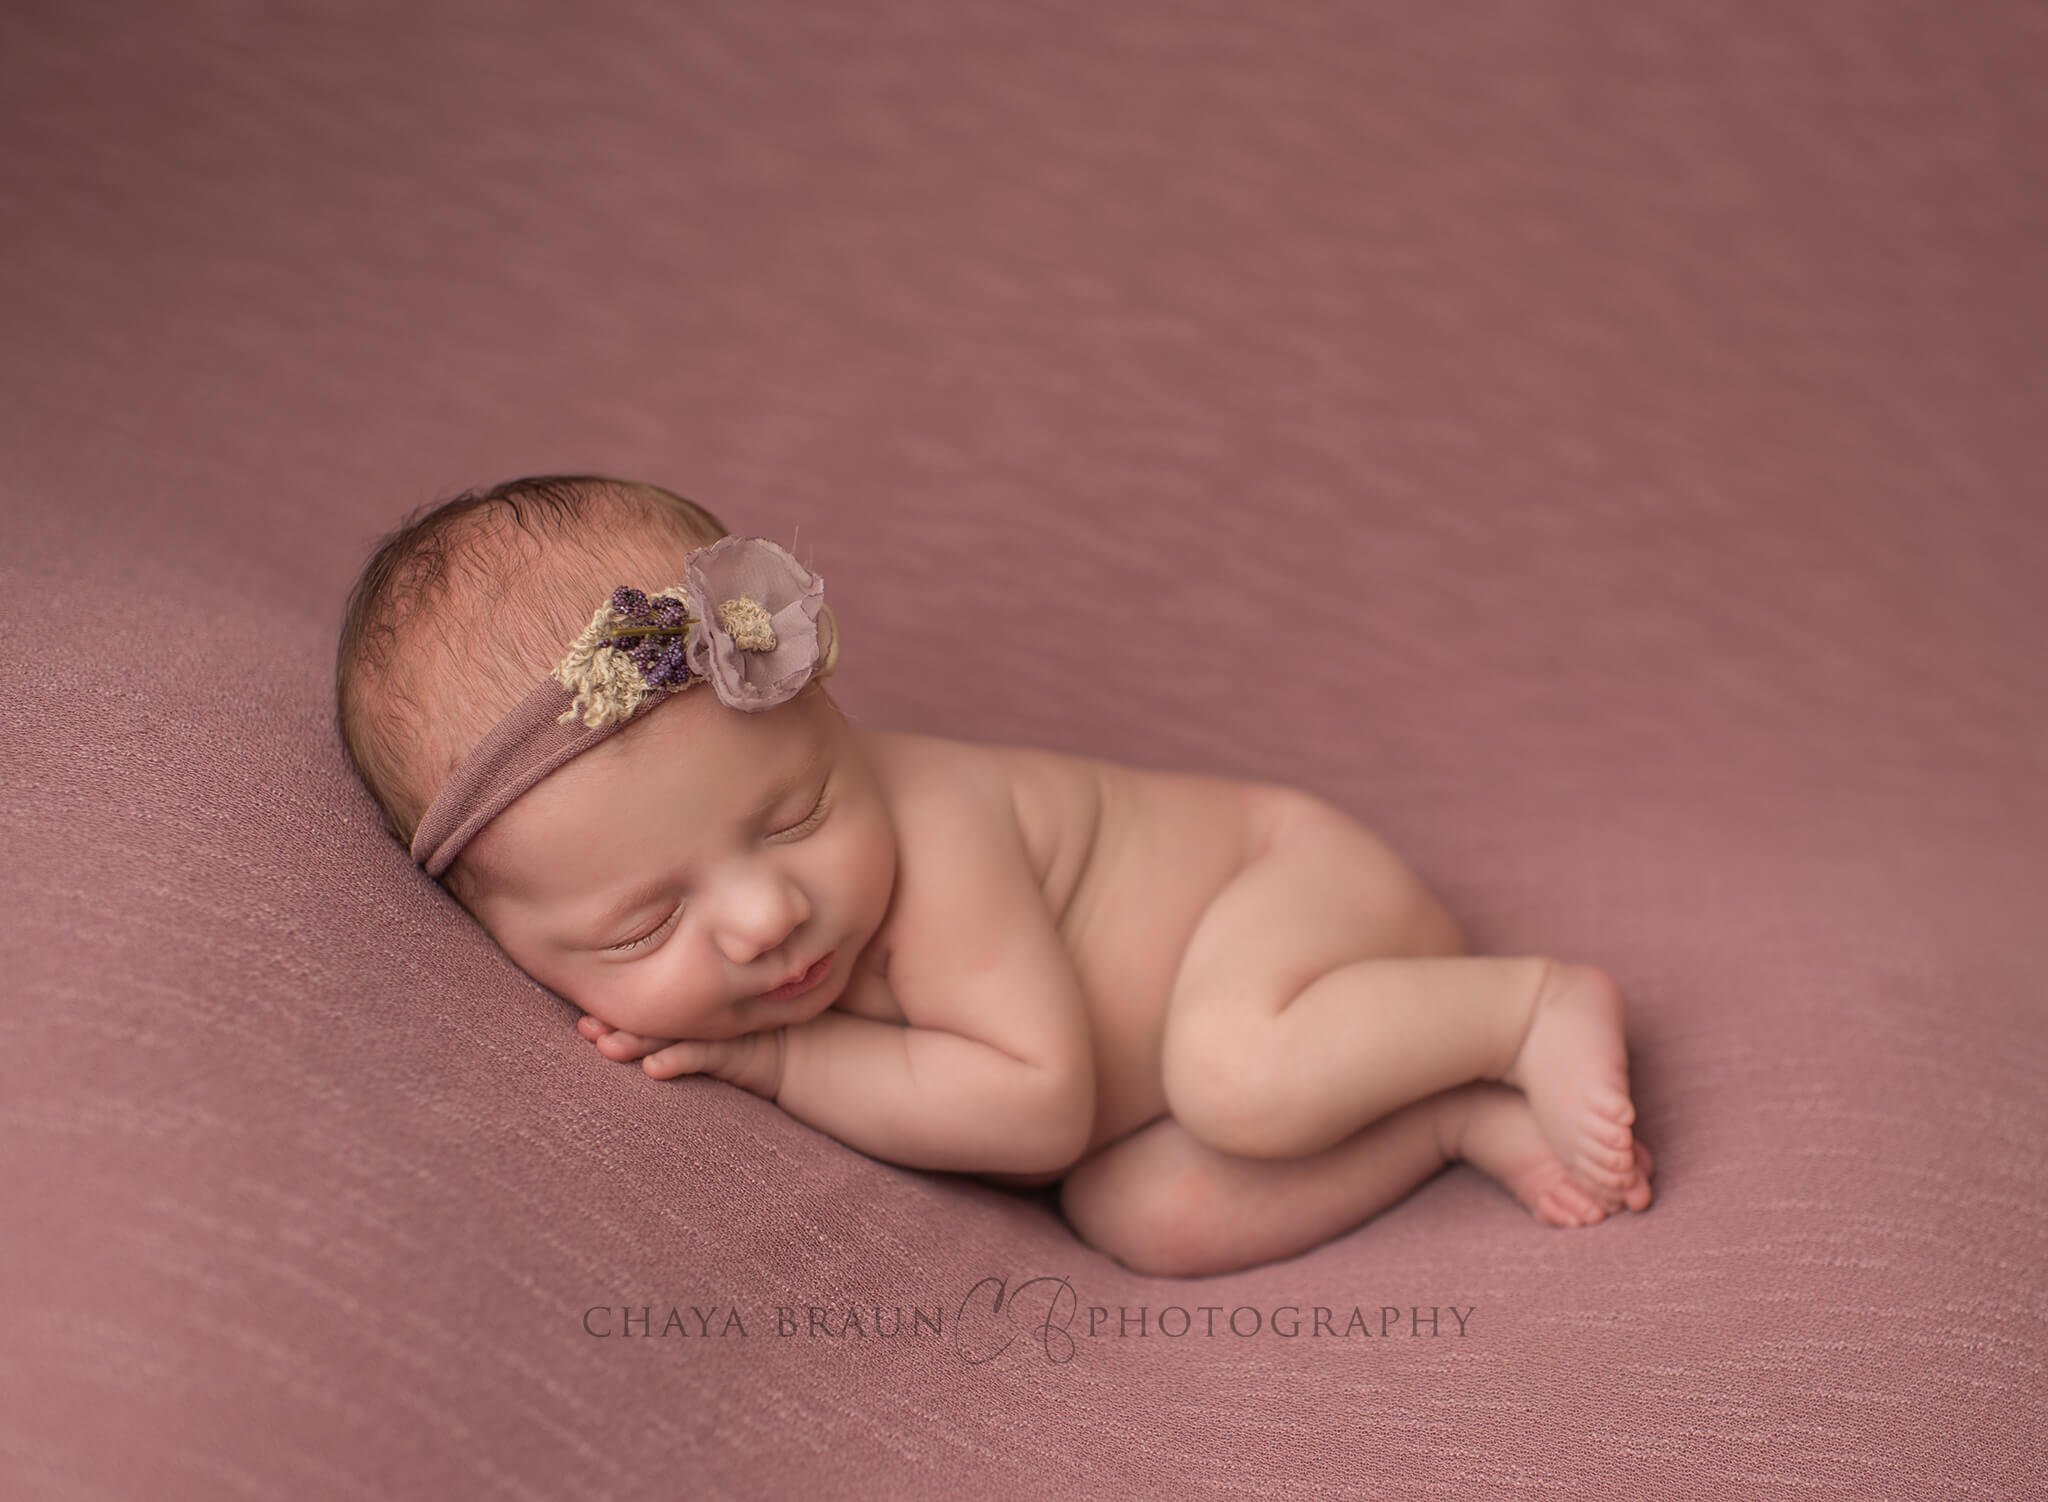 Baby photographer in Maryland